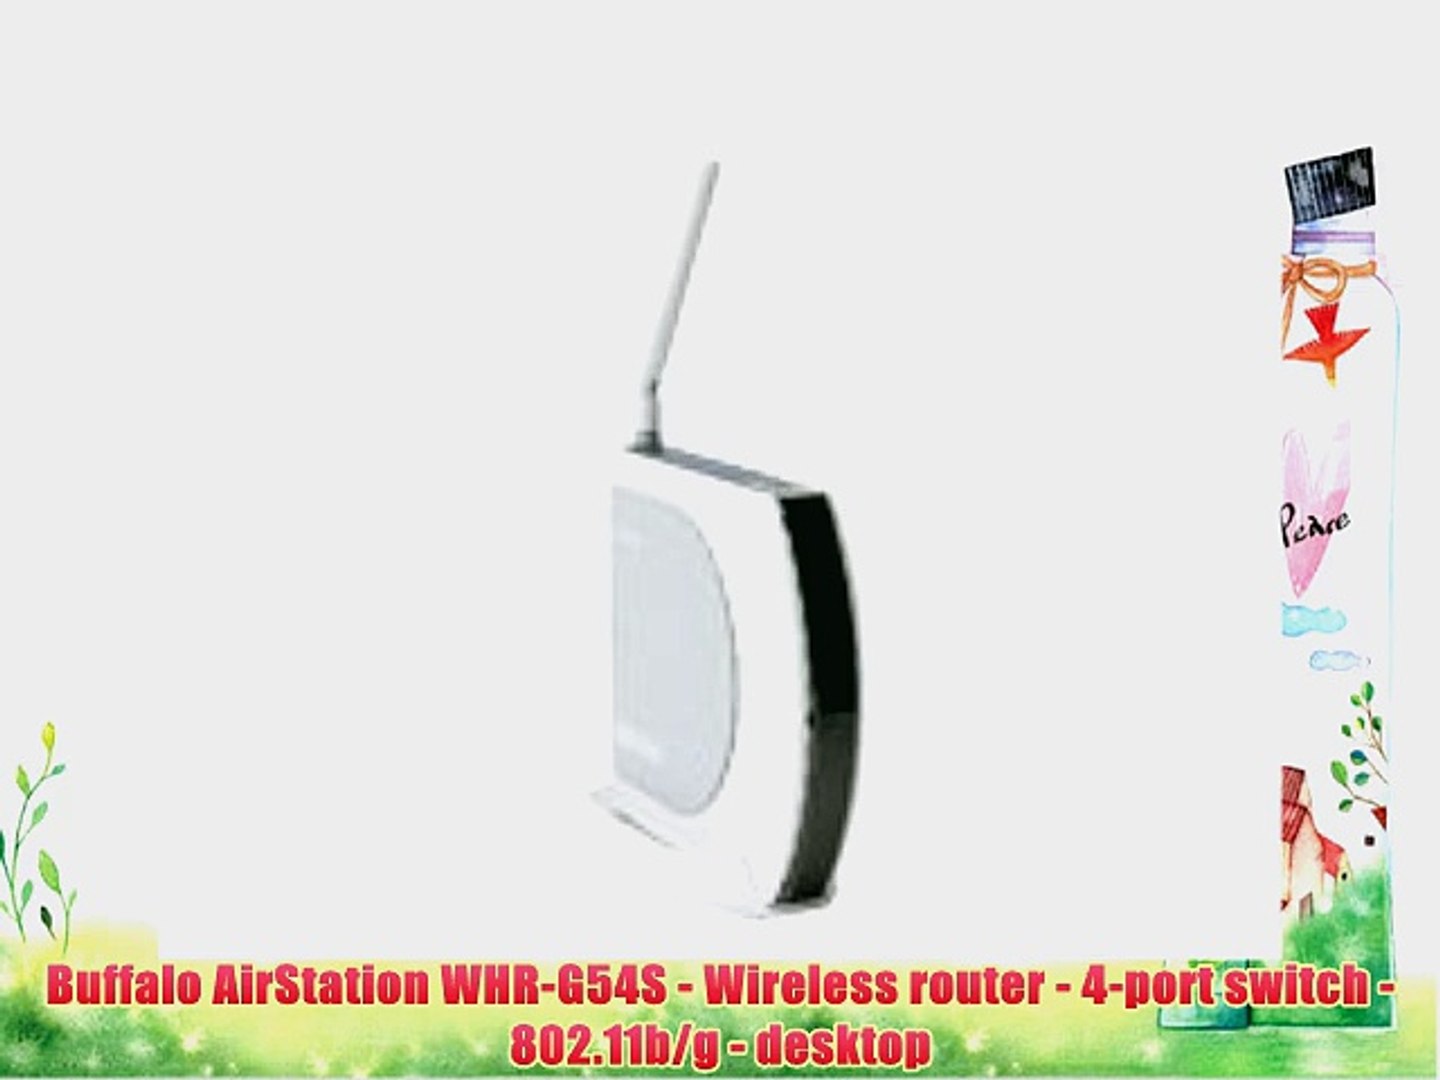 Buffalo AirStation WHR-G54S - Wireless router - 4-port switch - 802.11b/g -  desktop - video dailymotion